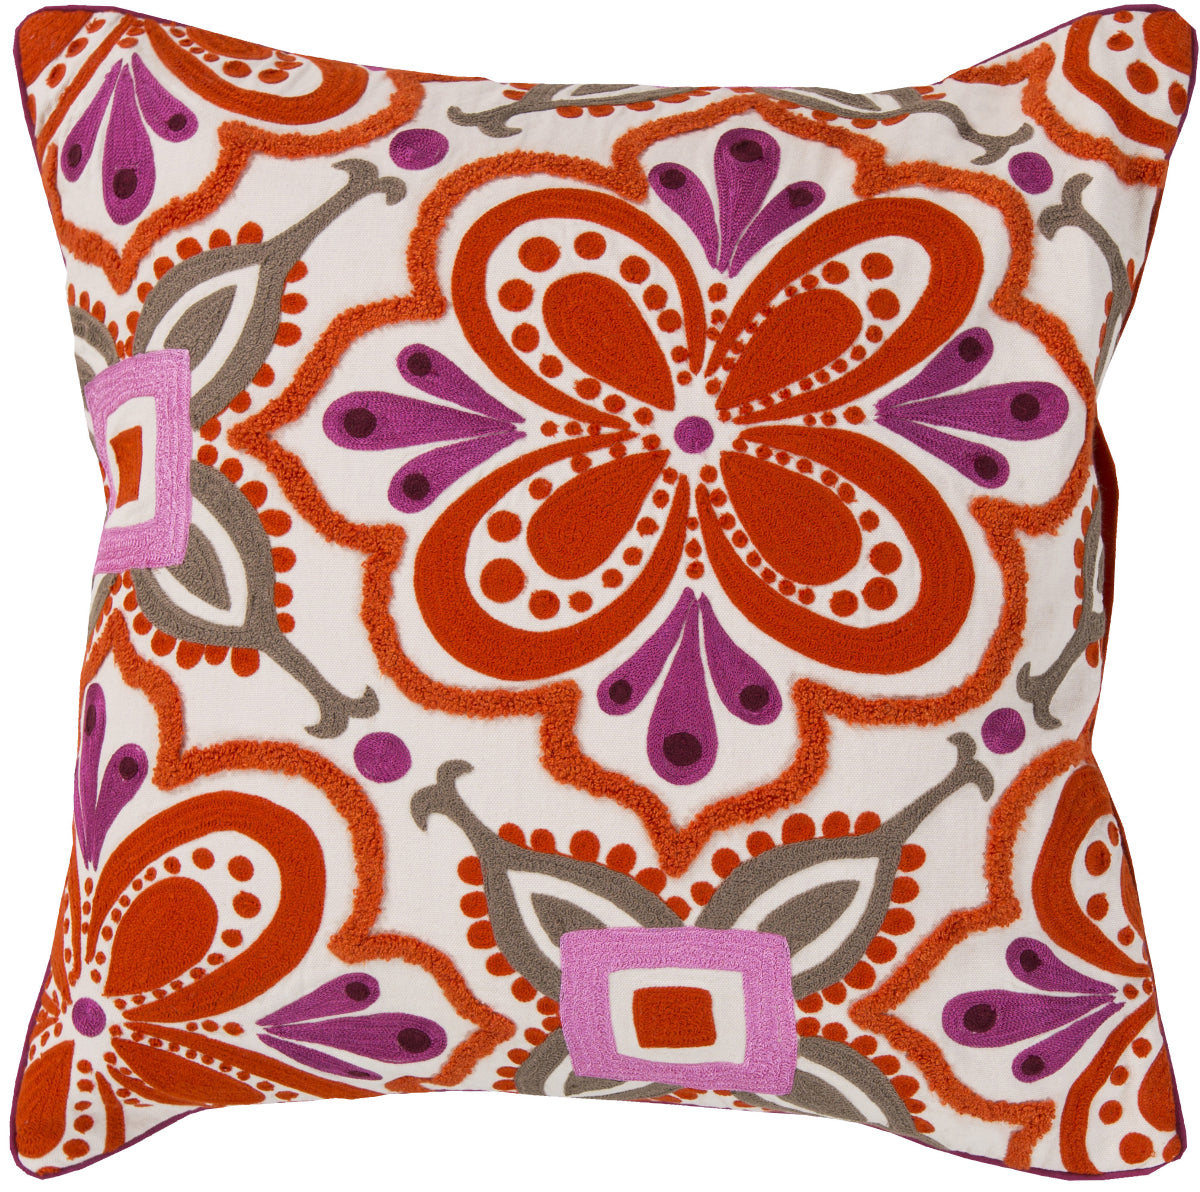 Surya Alhambra Embroidered Modern in Morocco KS-011 Pillow by Kate Spain main image